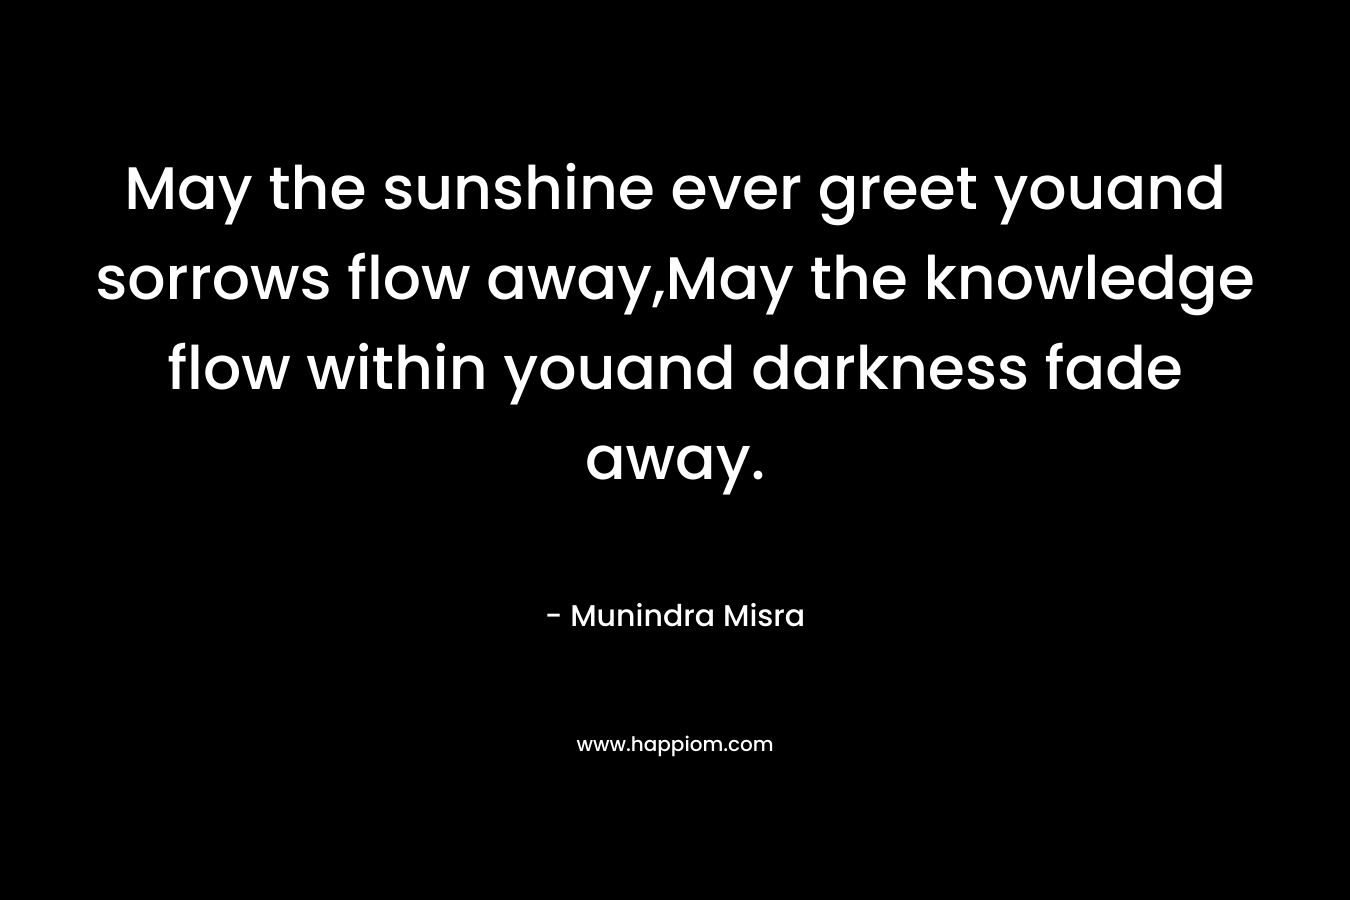 May the sunshine ever greet youand sorrows flow away,May the knowledge flow within youand darkness fade away.